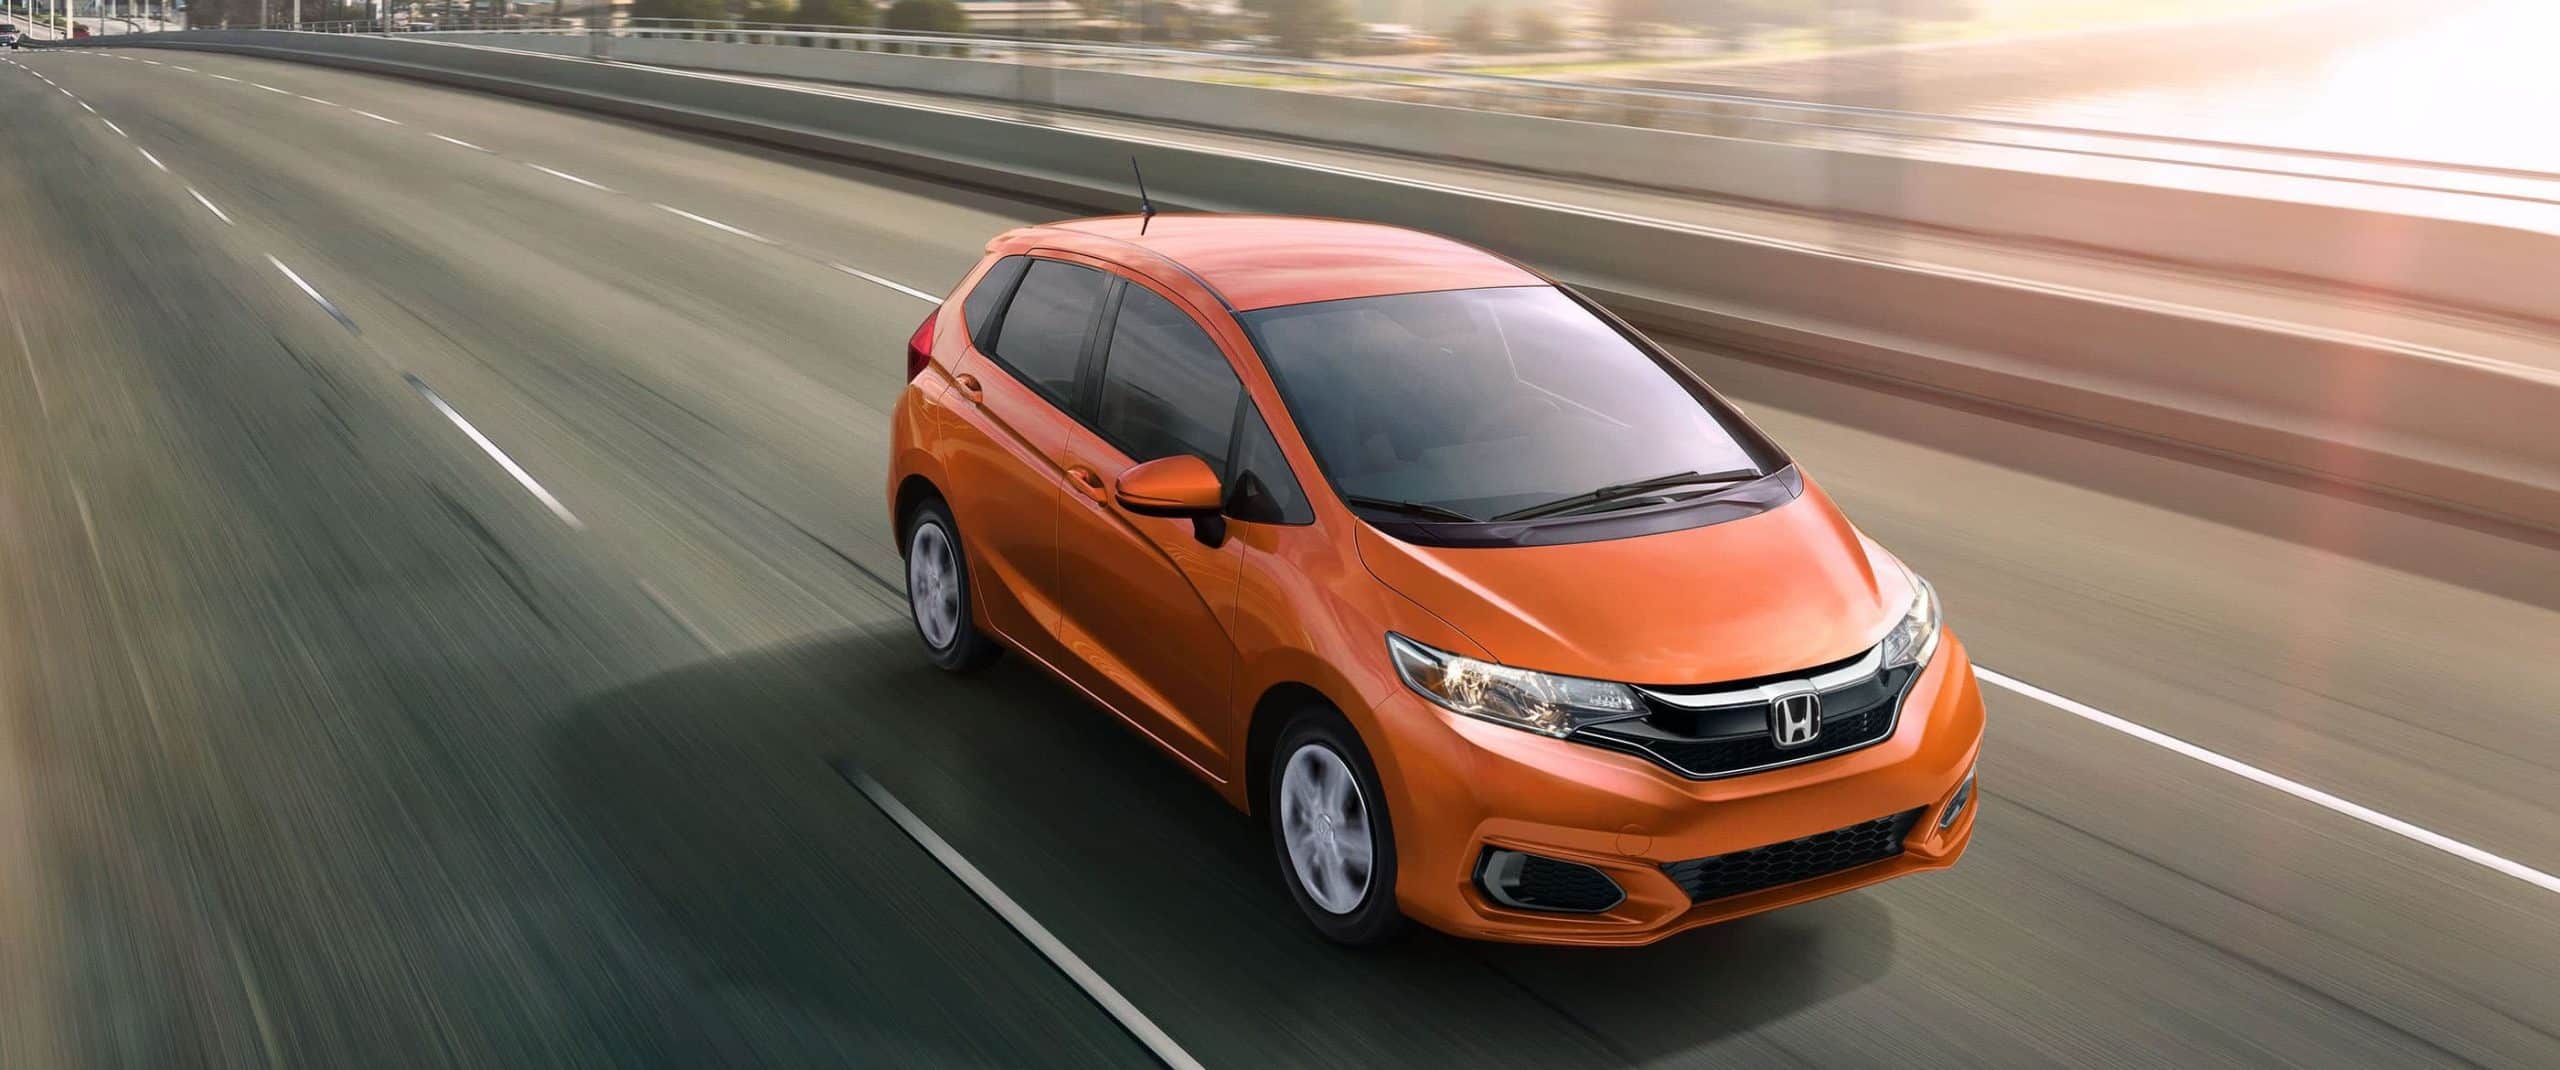 2018 Honda Fit Airbags, Safety Features, Safety Score